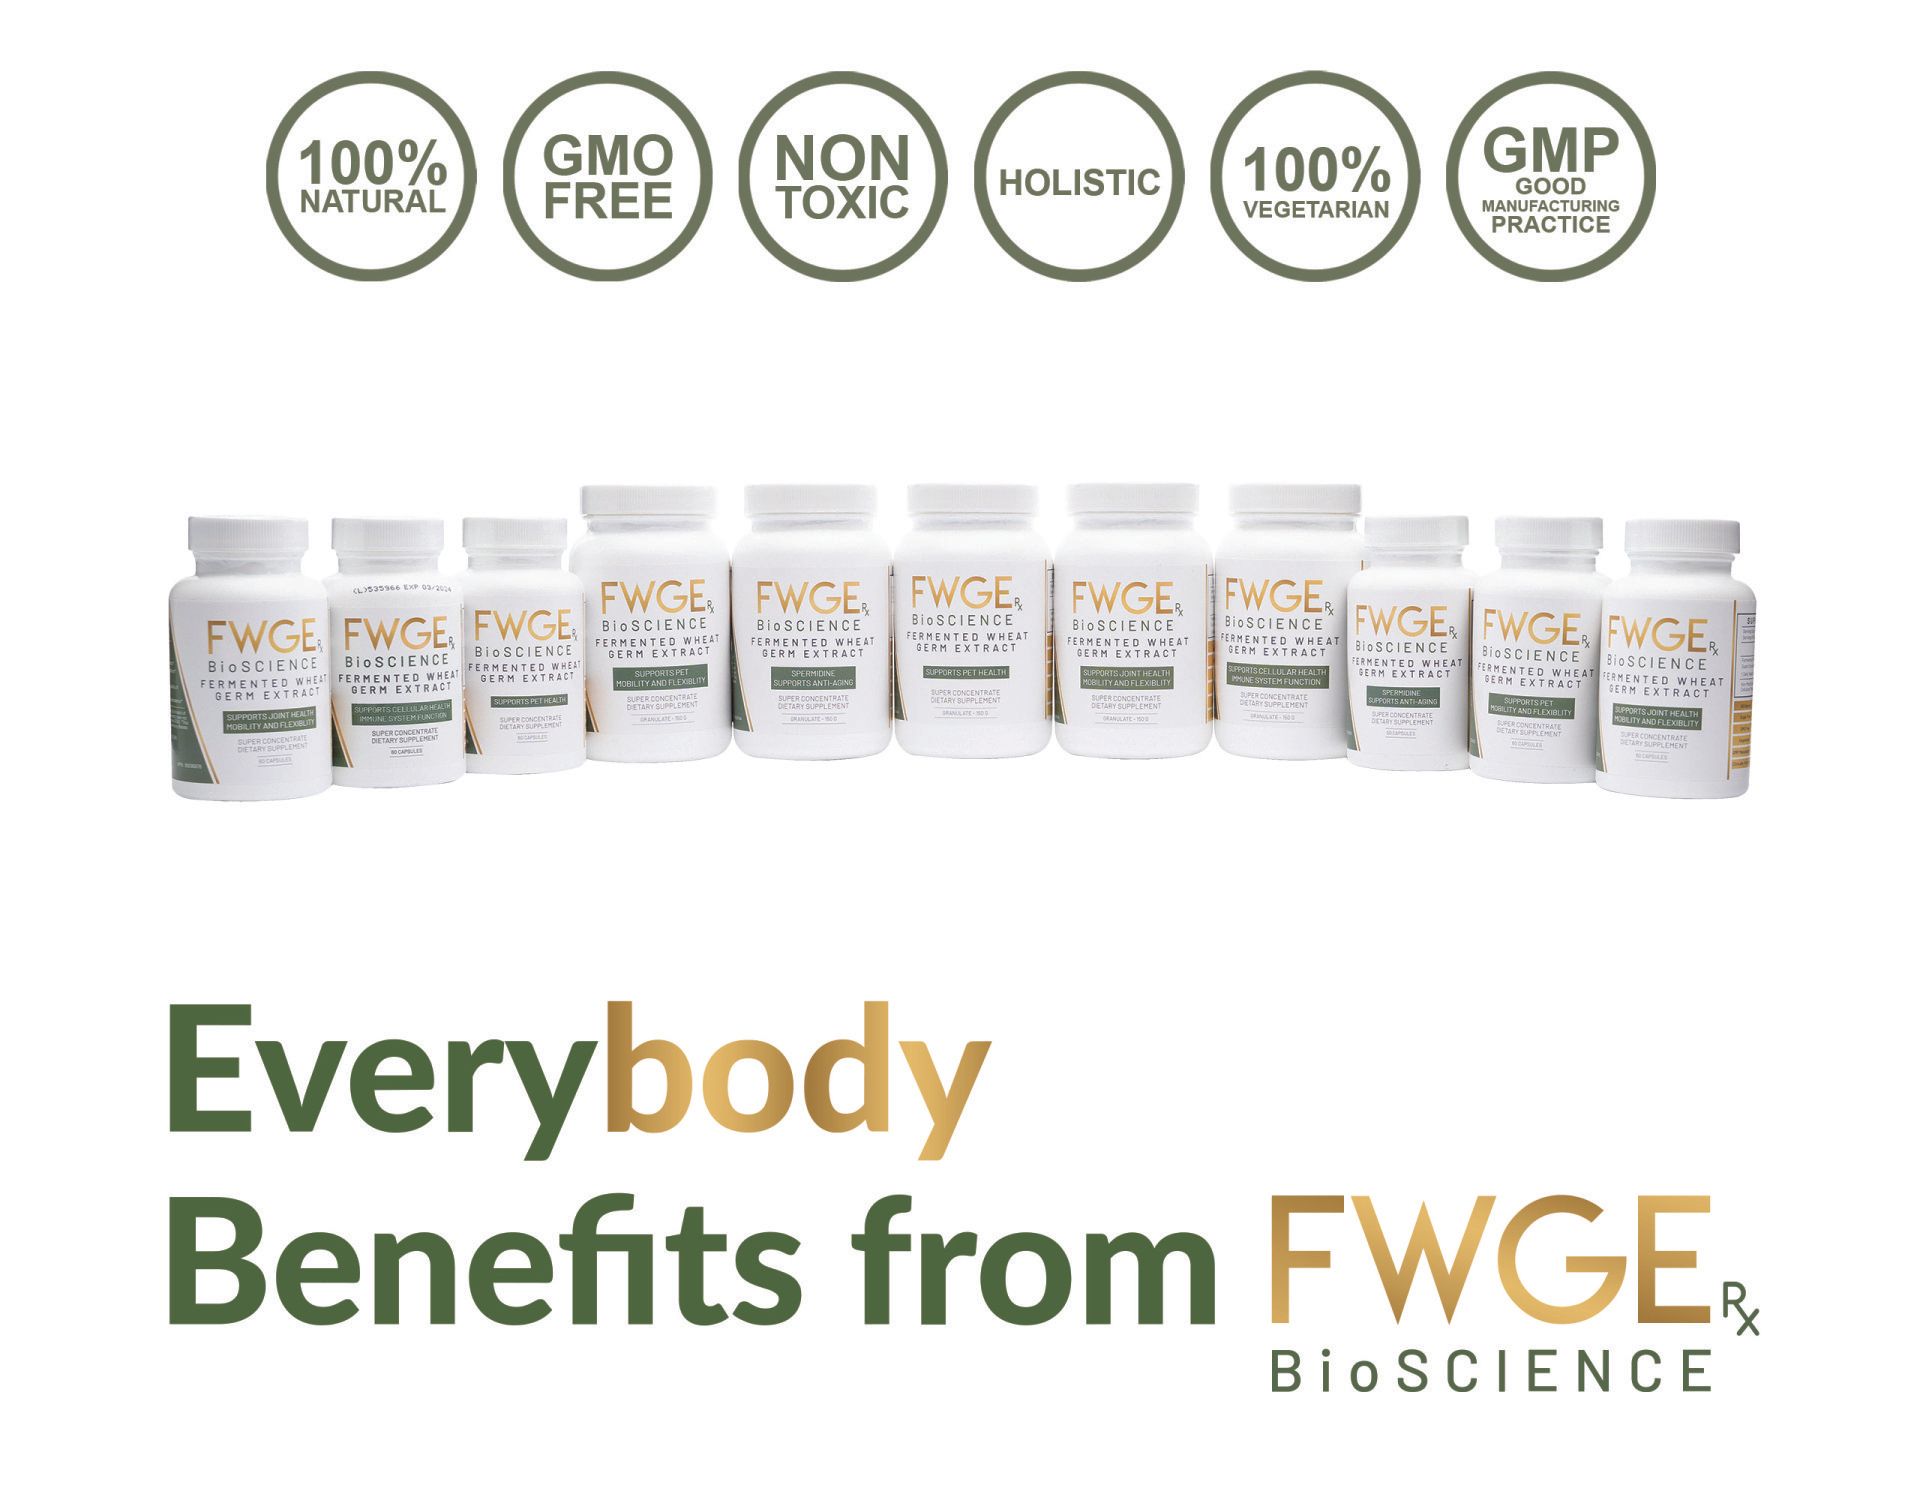 Everybody Benefits from FWGE BioScience Fermented Wheat Germ Extract Super Concentrate. 100 Natural, GMO Free, NON Toxic, Holistic, 100% Vegetarian, GMP Good Manufacturing Practice.